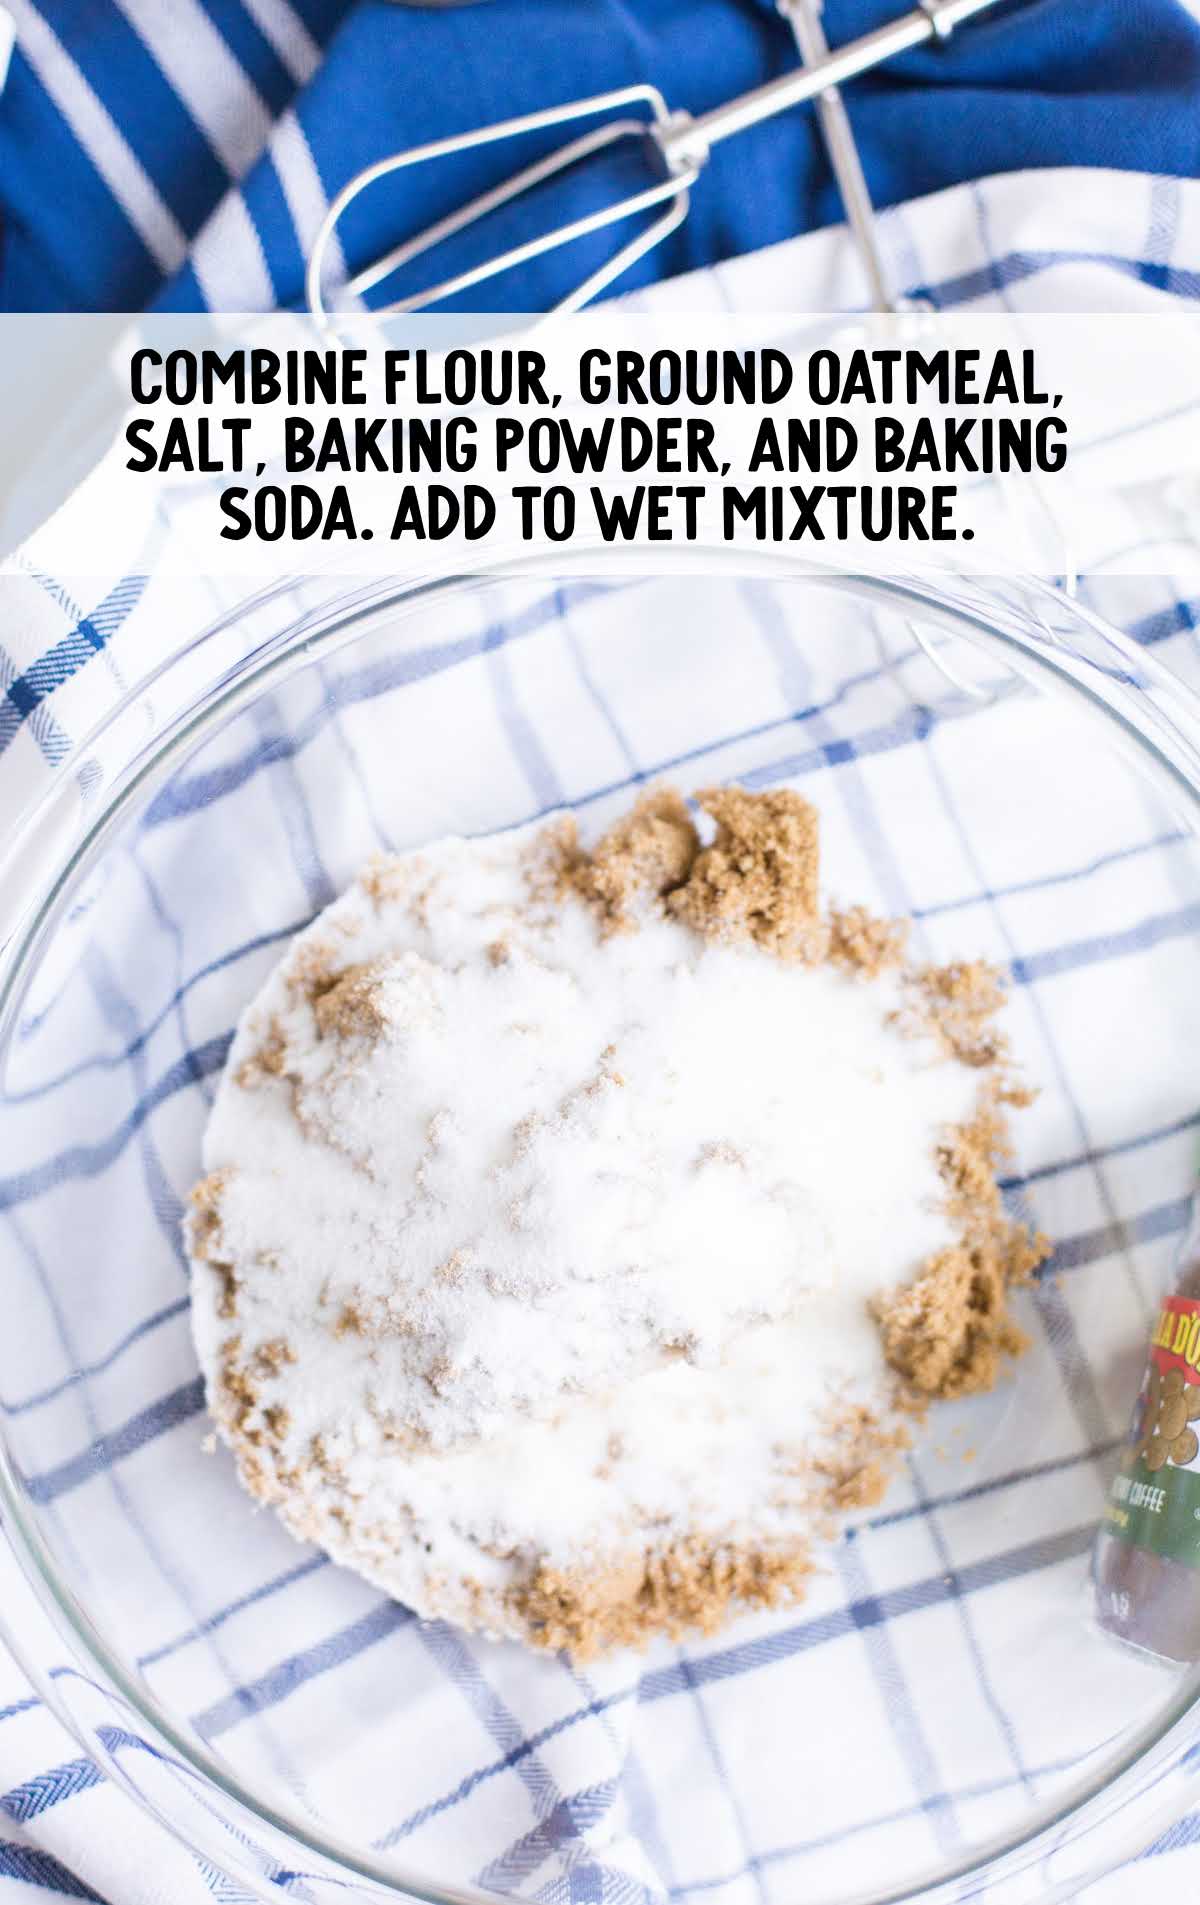 flour, grounded oatmeal, salt, baking powder, and baking soda to the we ingredients